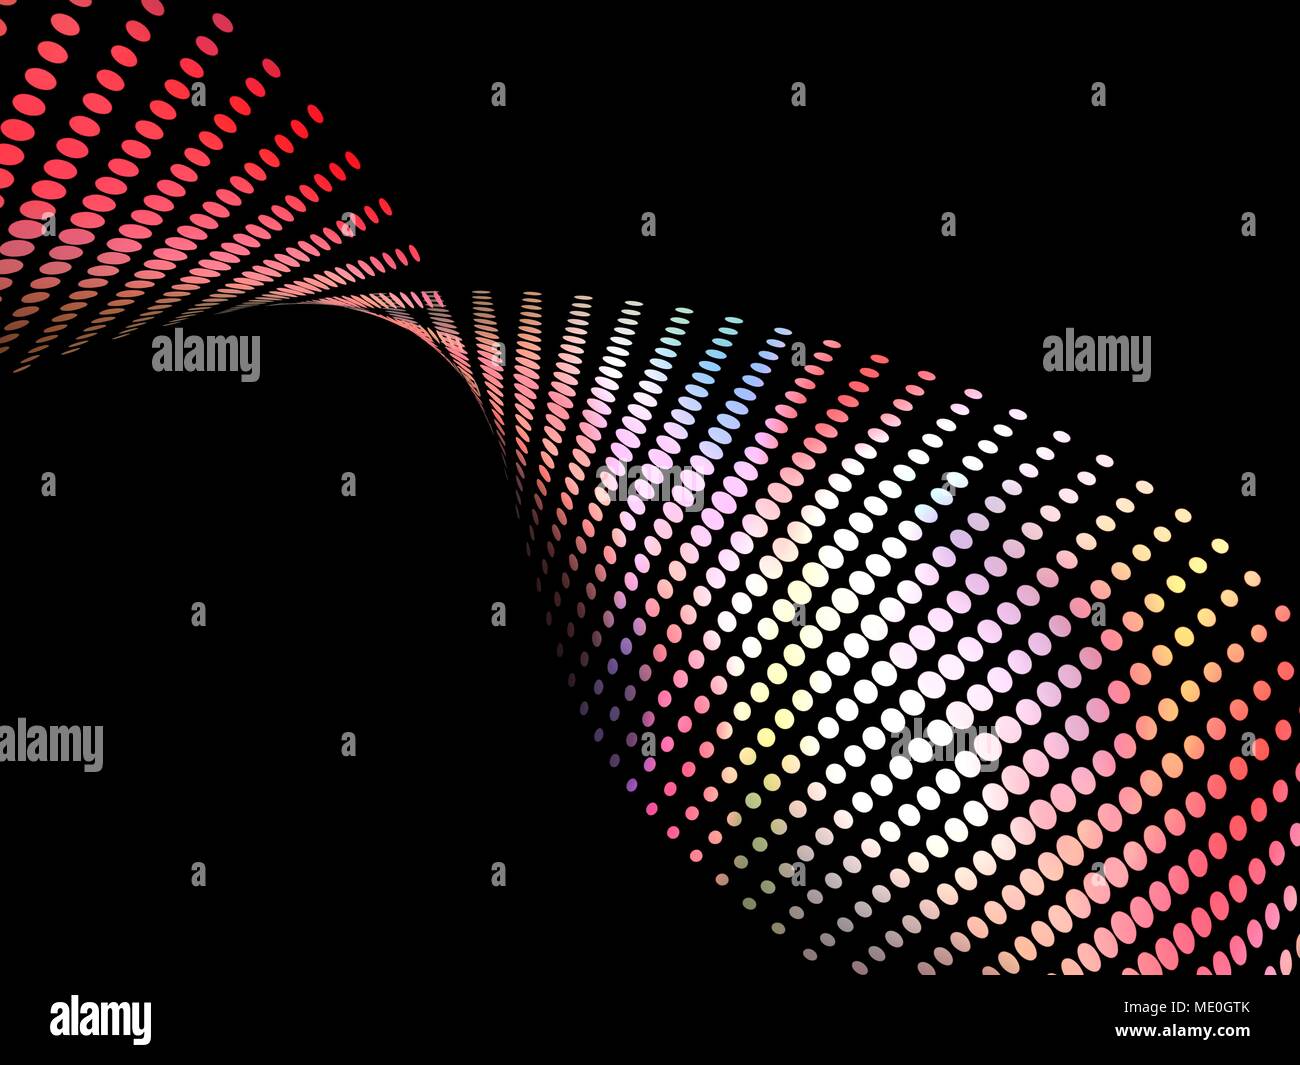 Abstract wave made of coloured dots, illustration. Stock Photo